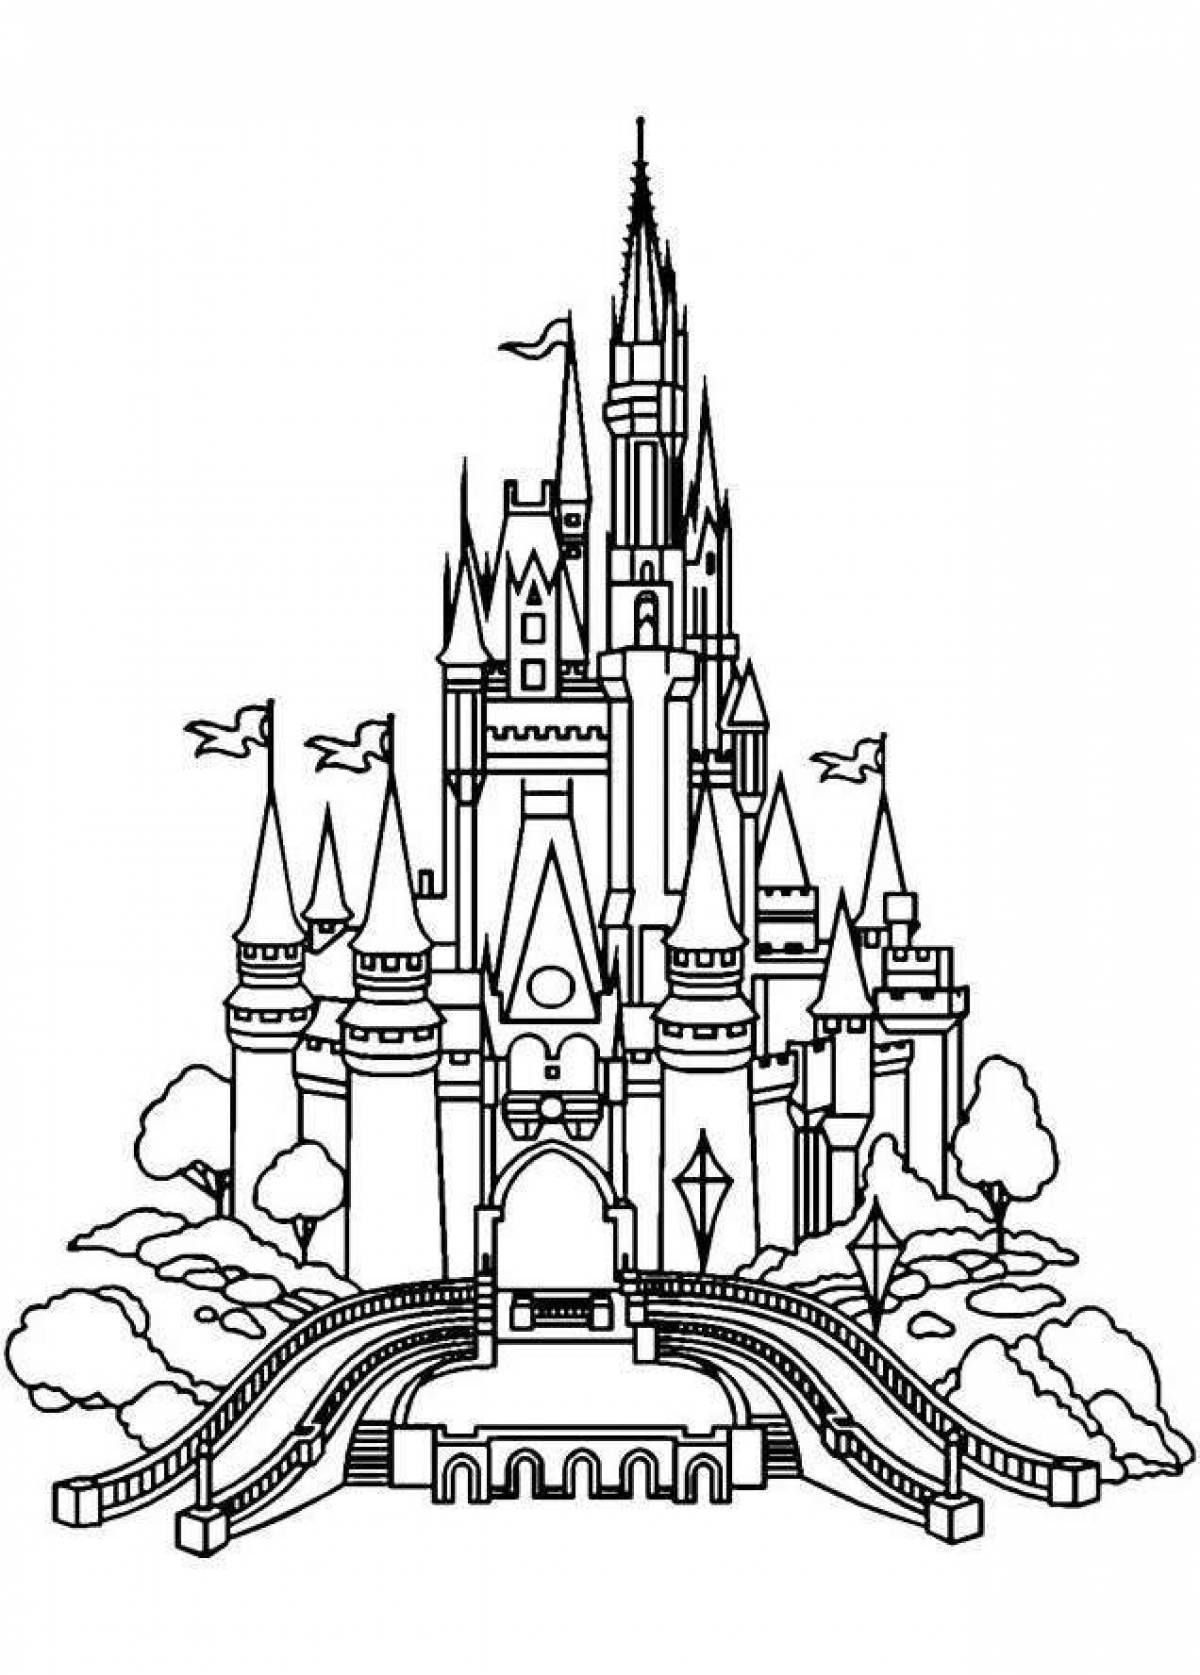 Coloring page of the snow queen's charming castle